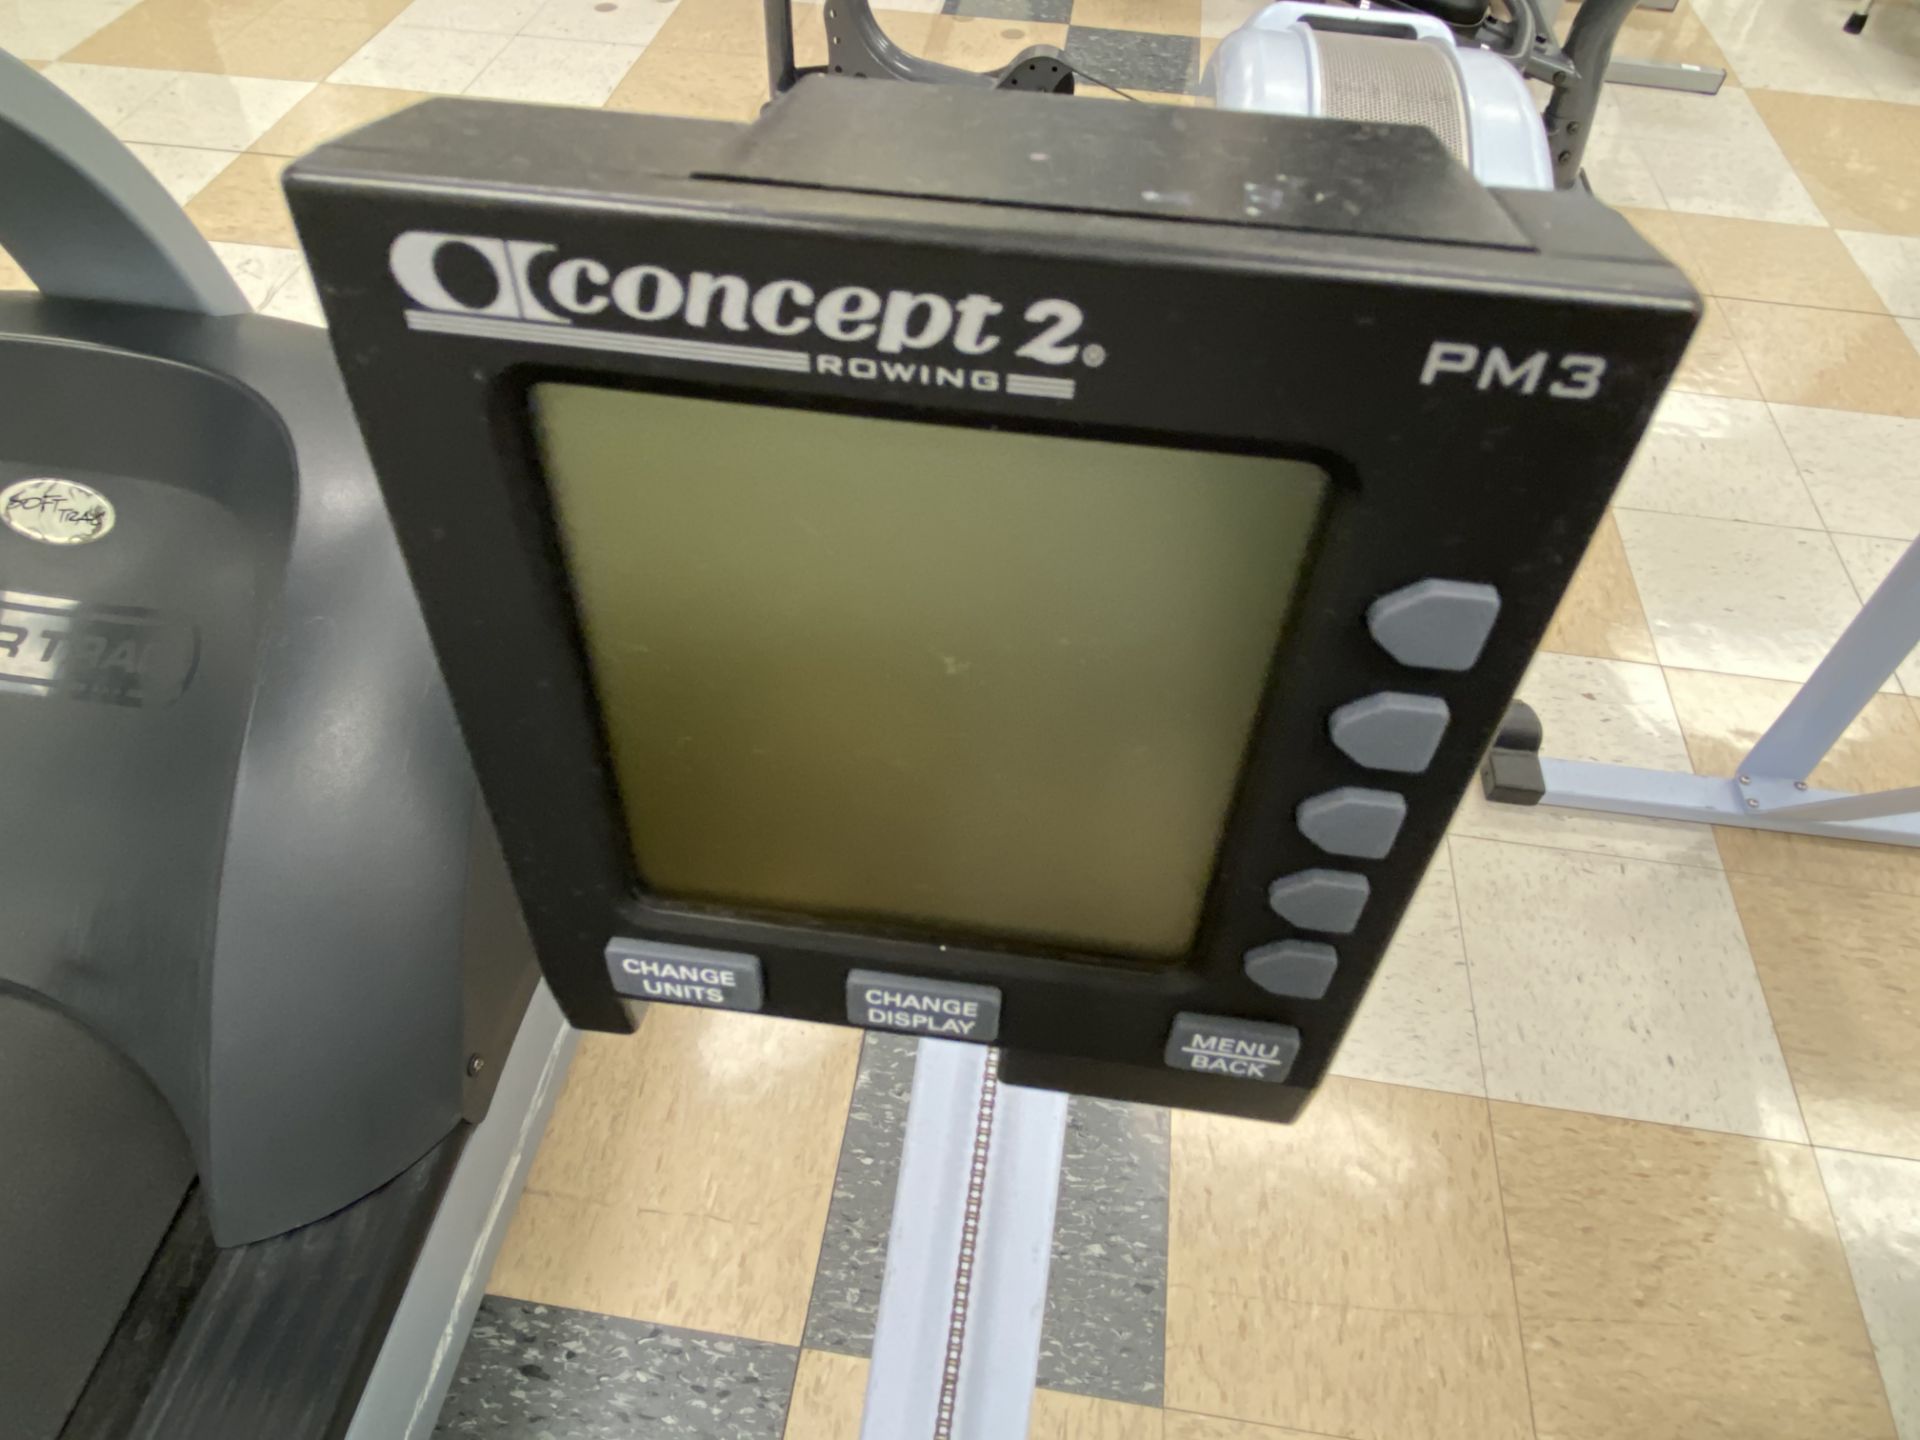 Concept 2 Model D rowing machine. S/No. 050907A-300092436-0 - Image 8 of 11